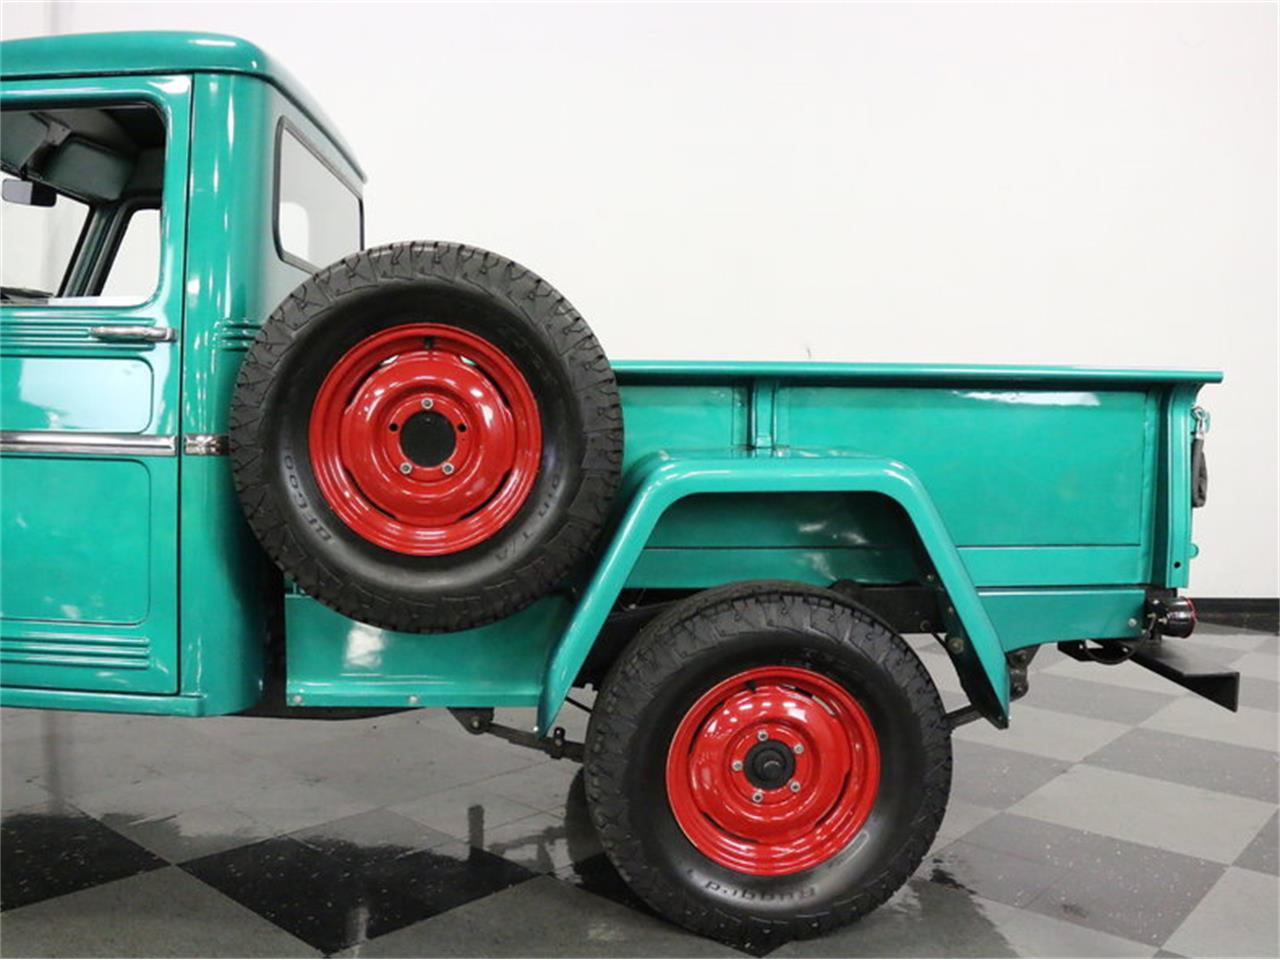 1960 Willys Pickup 4x4 For Sale Cc 1053104